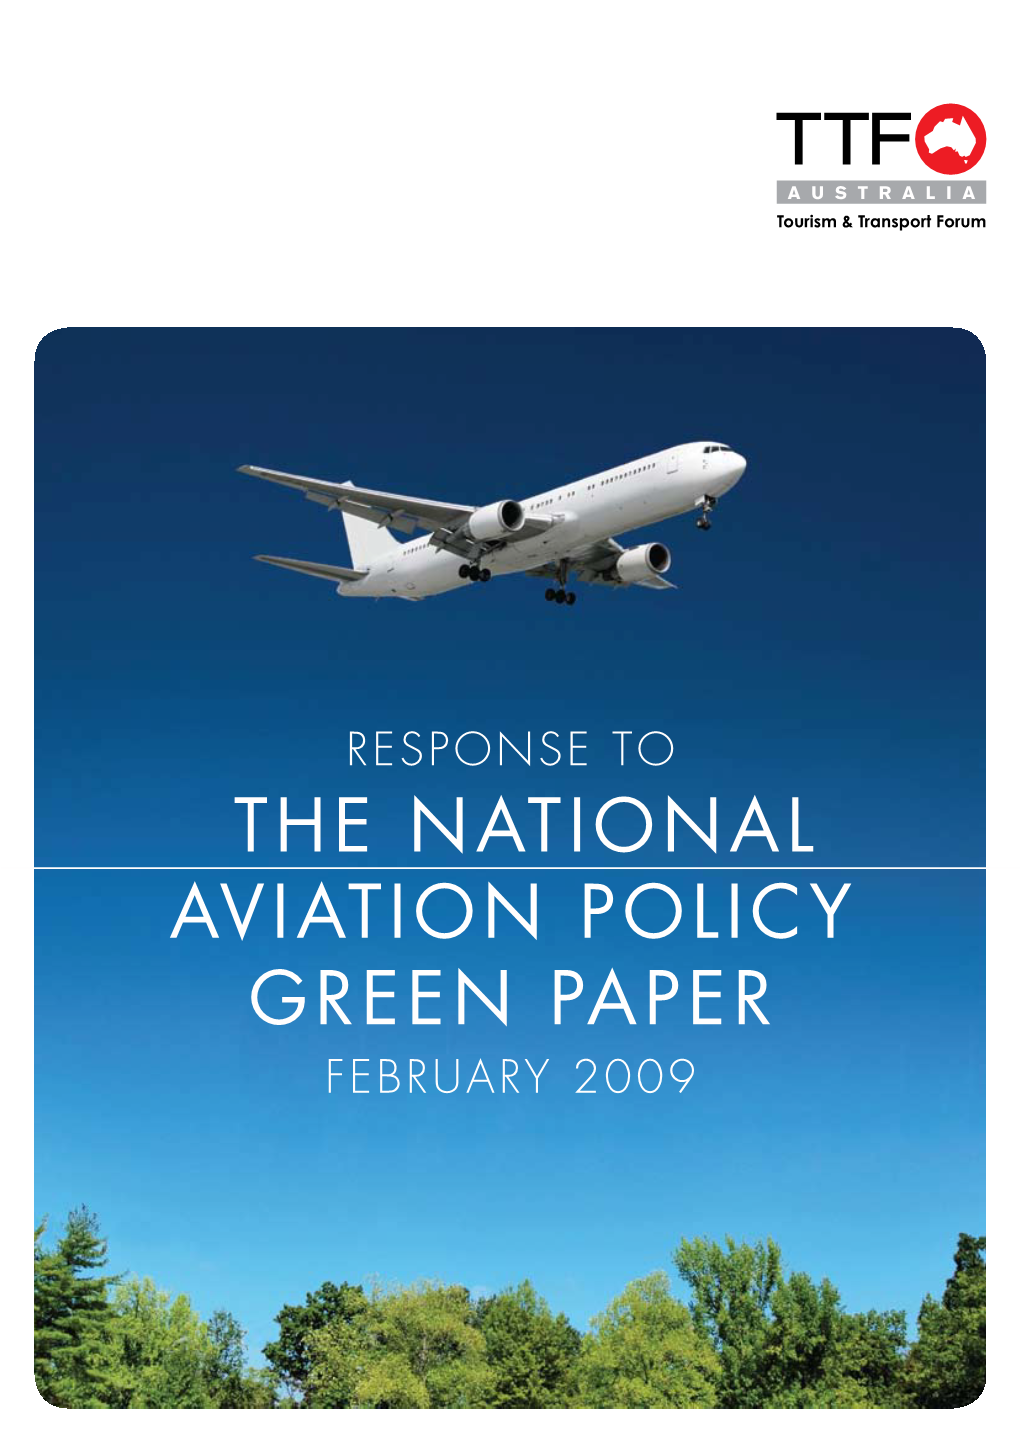 The National Aviation Policy Green Paper February 2009 for More Information Please Contact